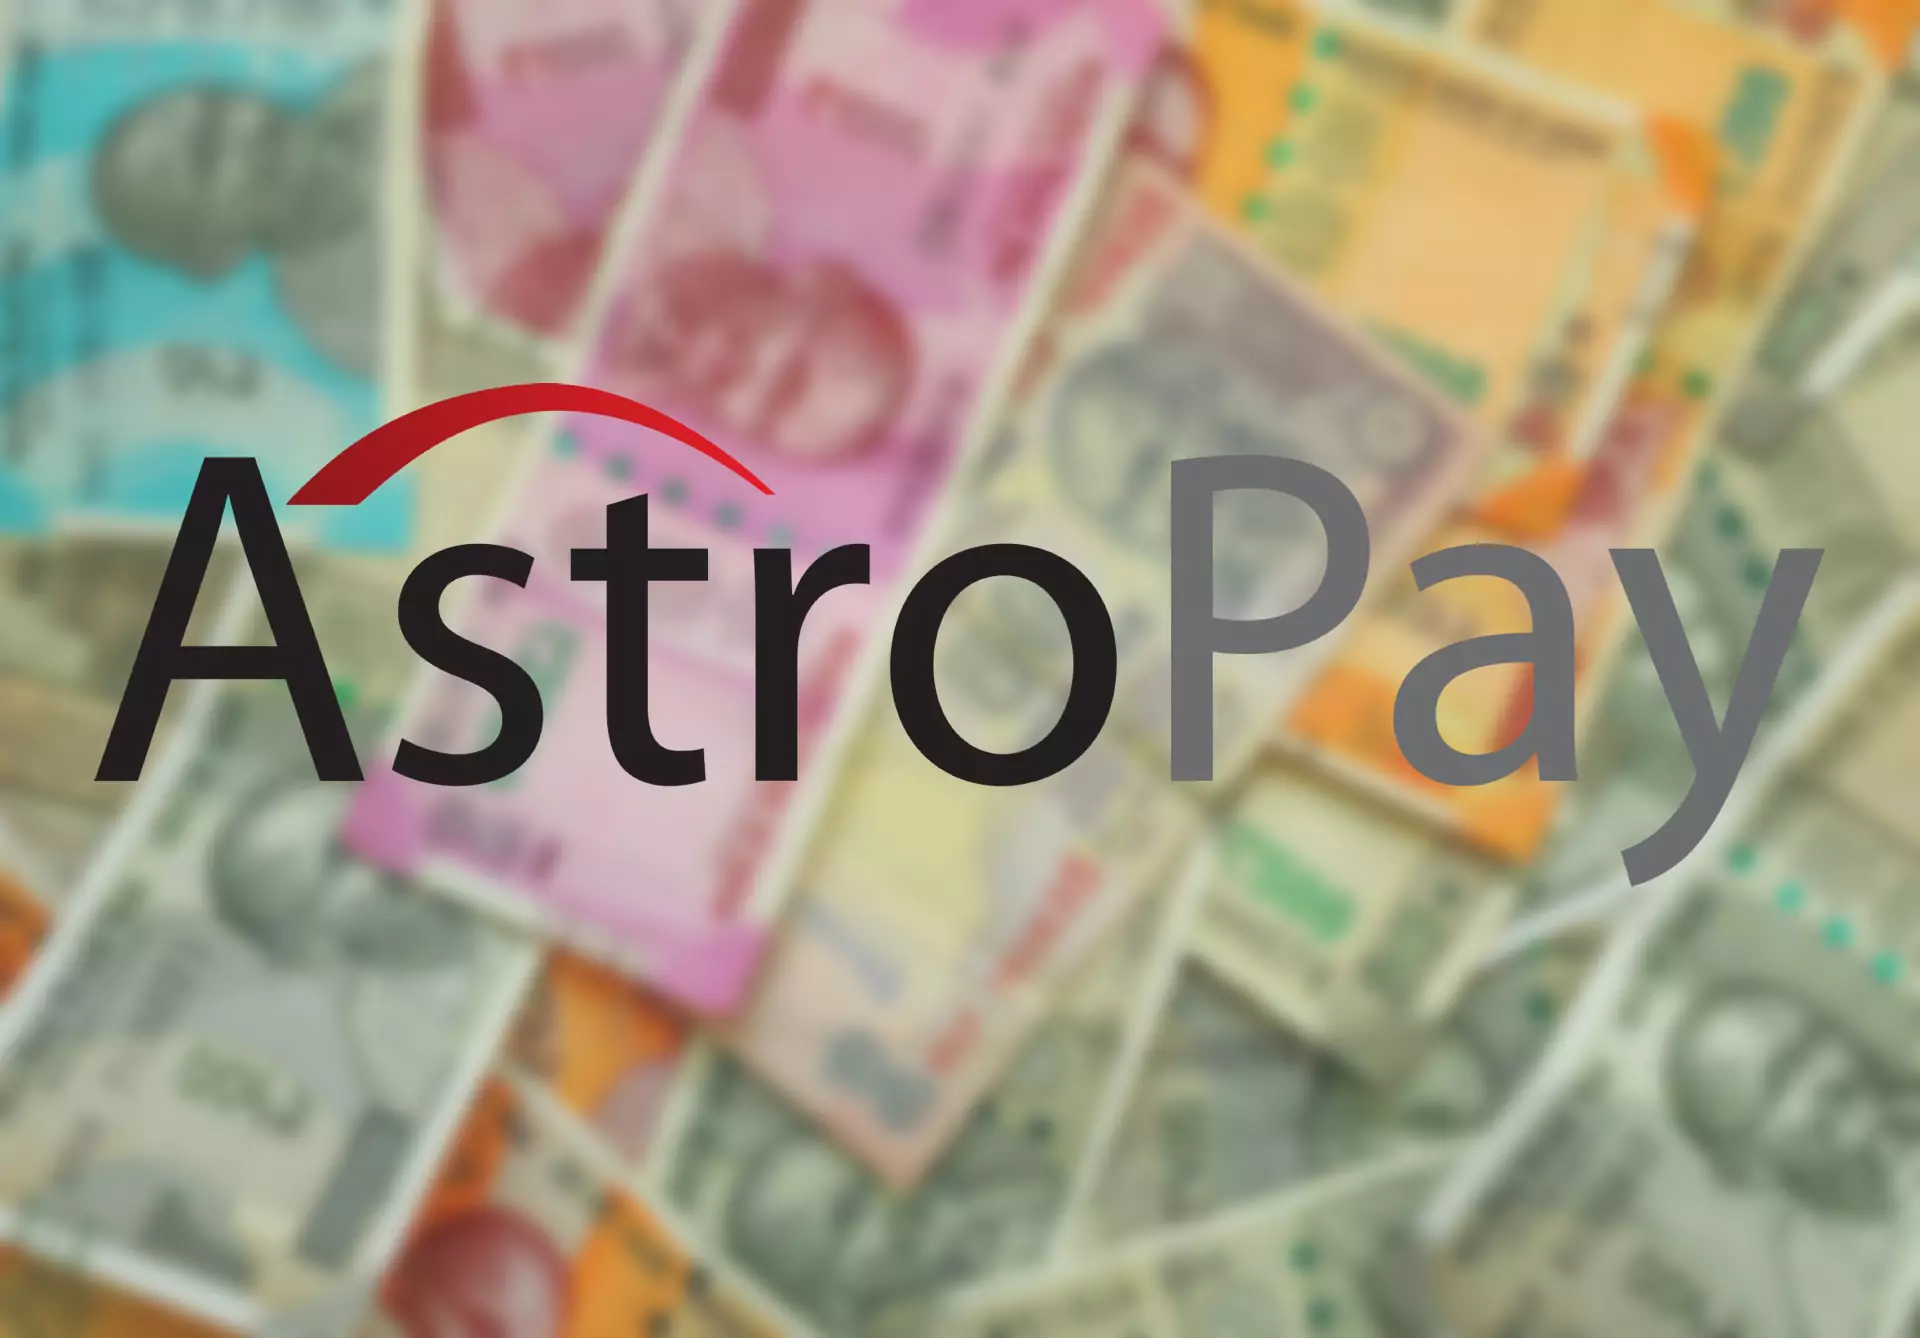 Use Astropay Cards to make a deposit to a cricket betting site.